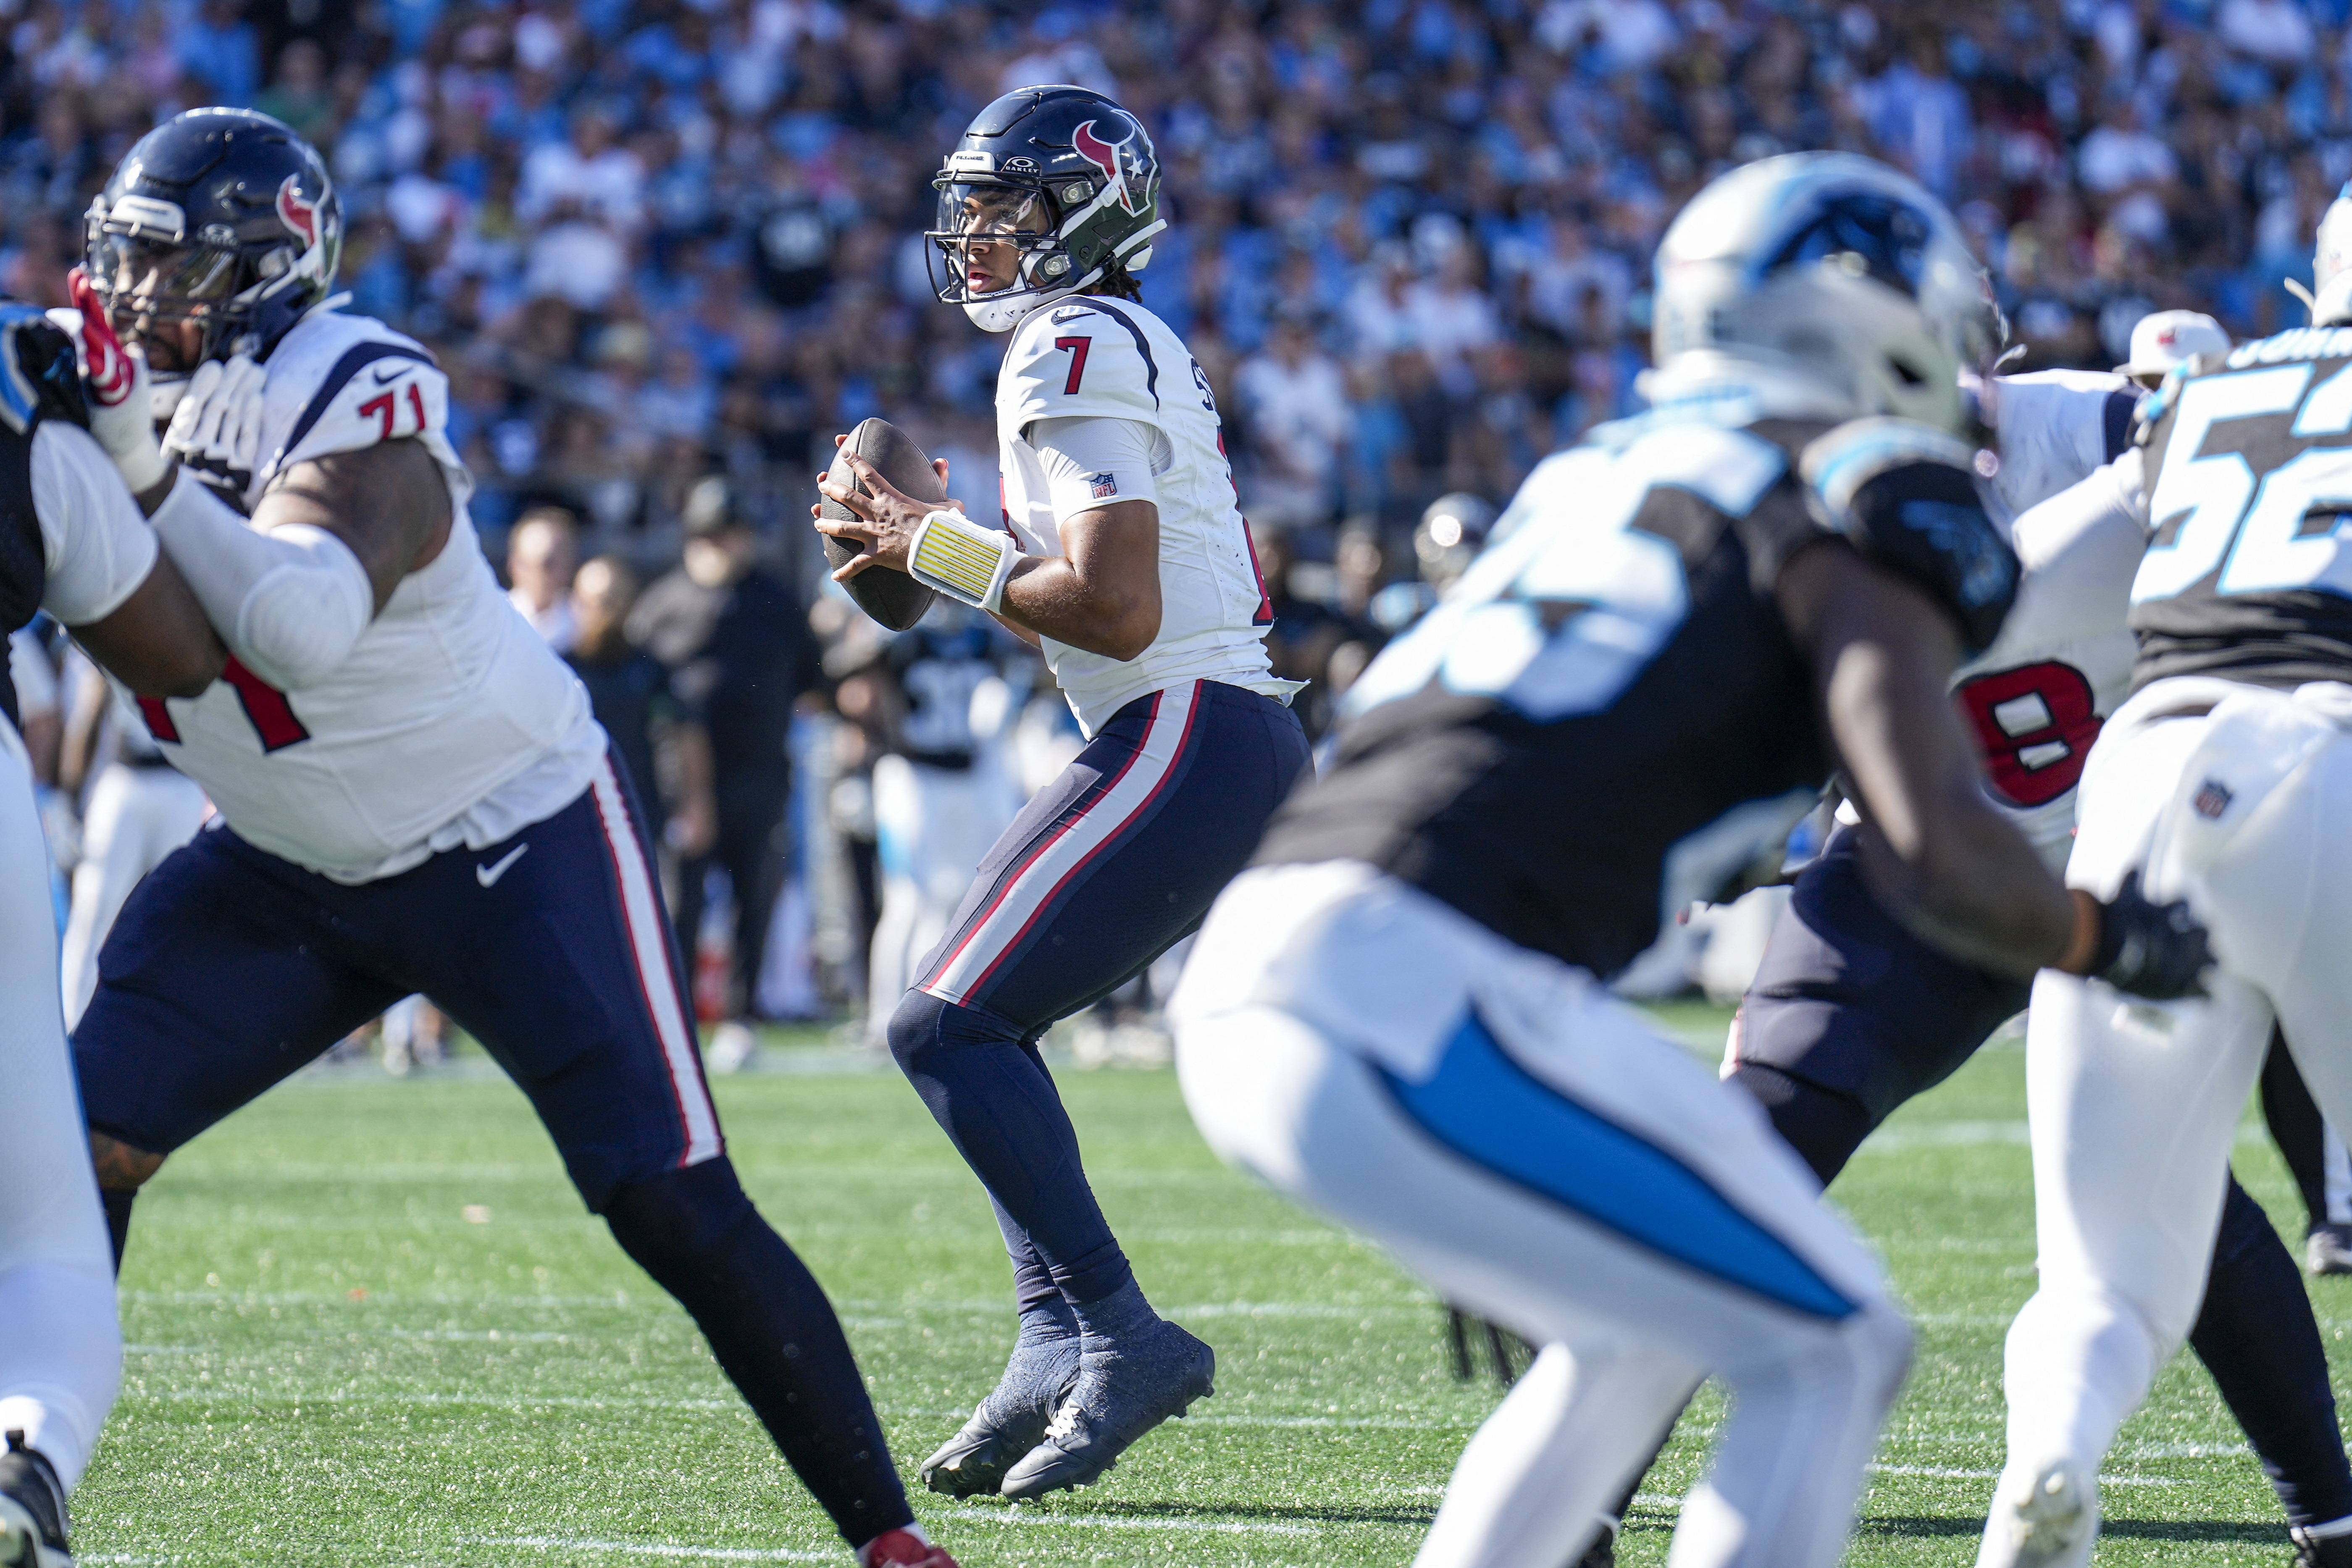 Panthers get first win, overcome Texans on late FG